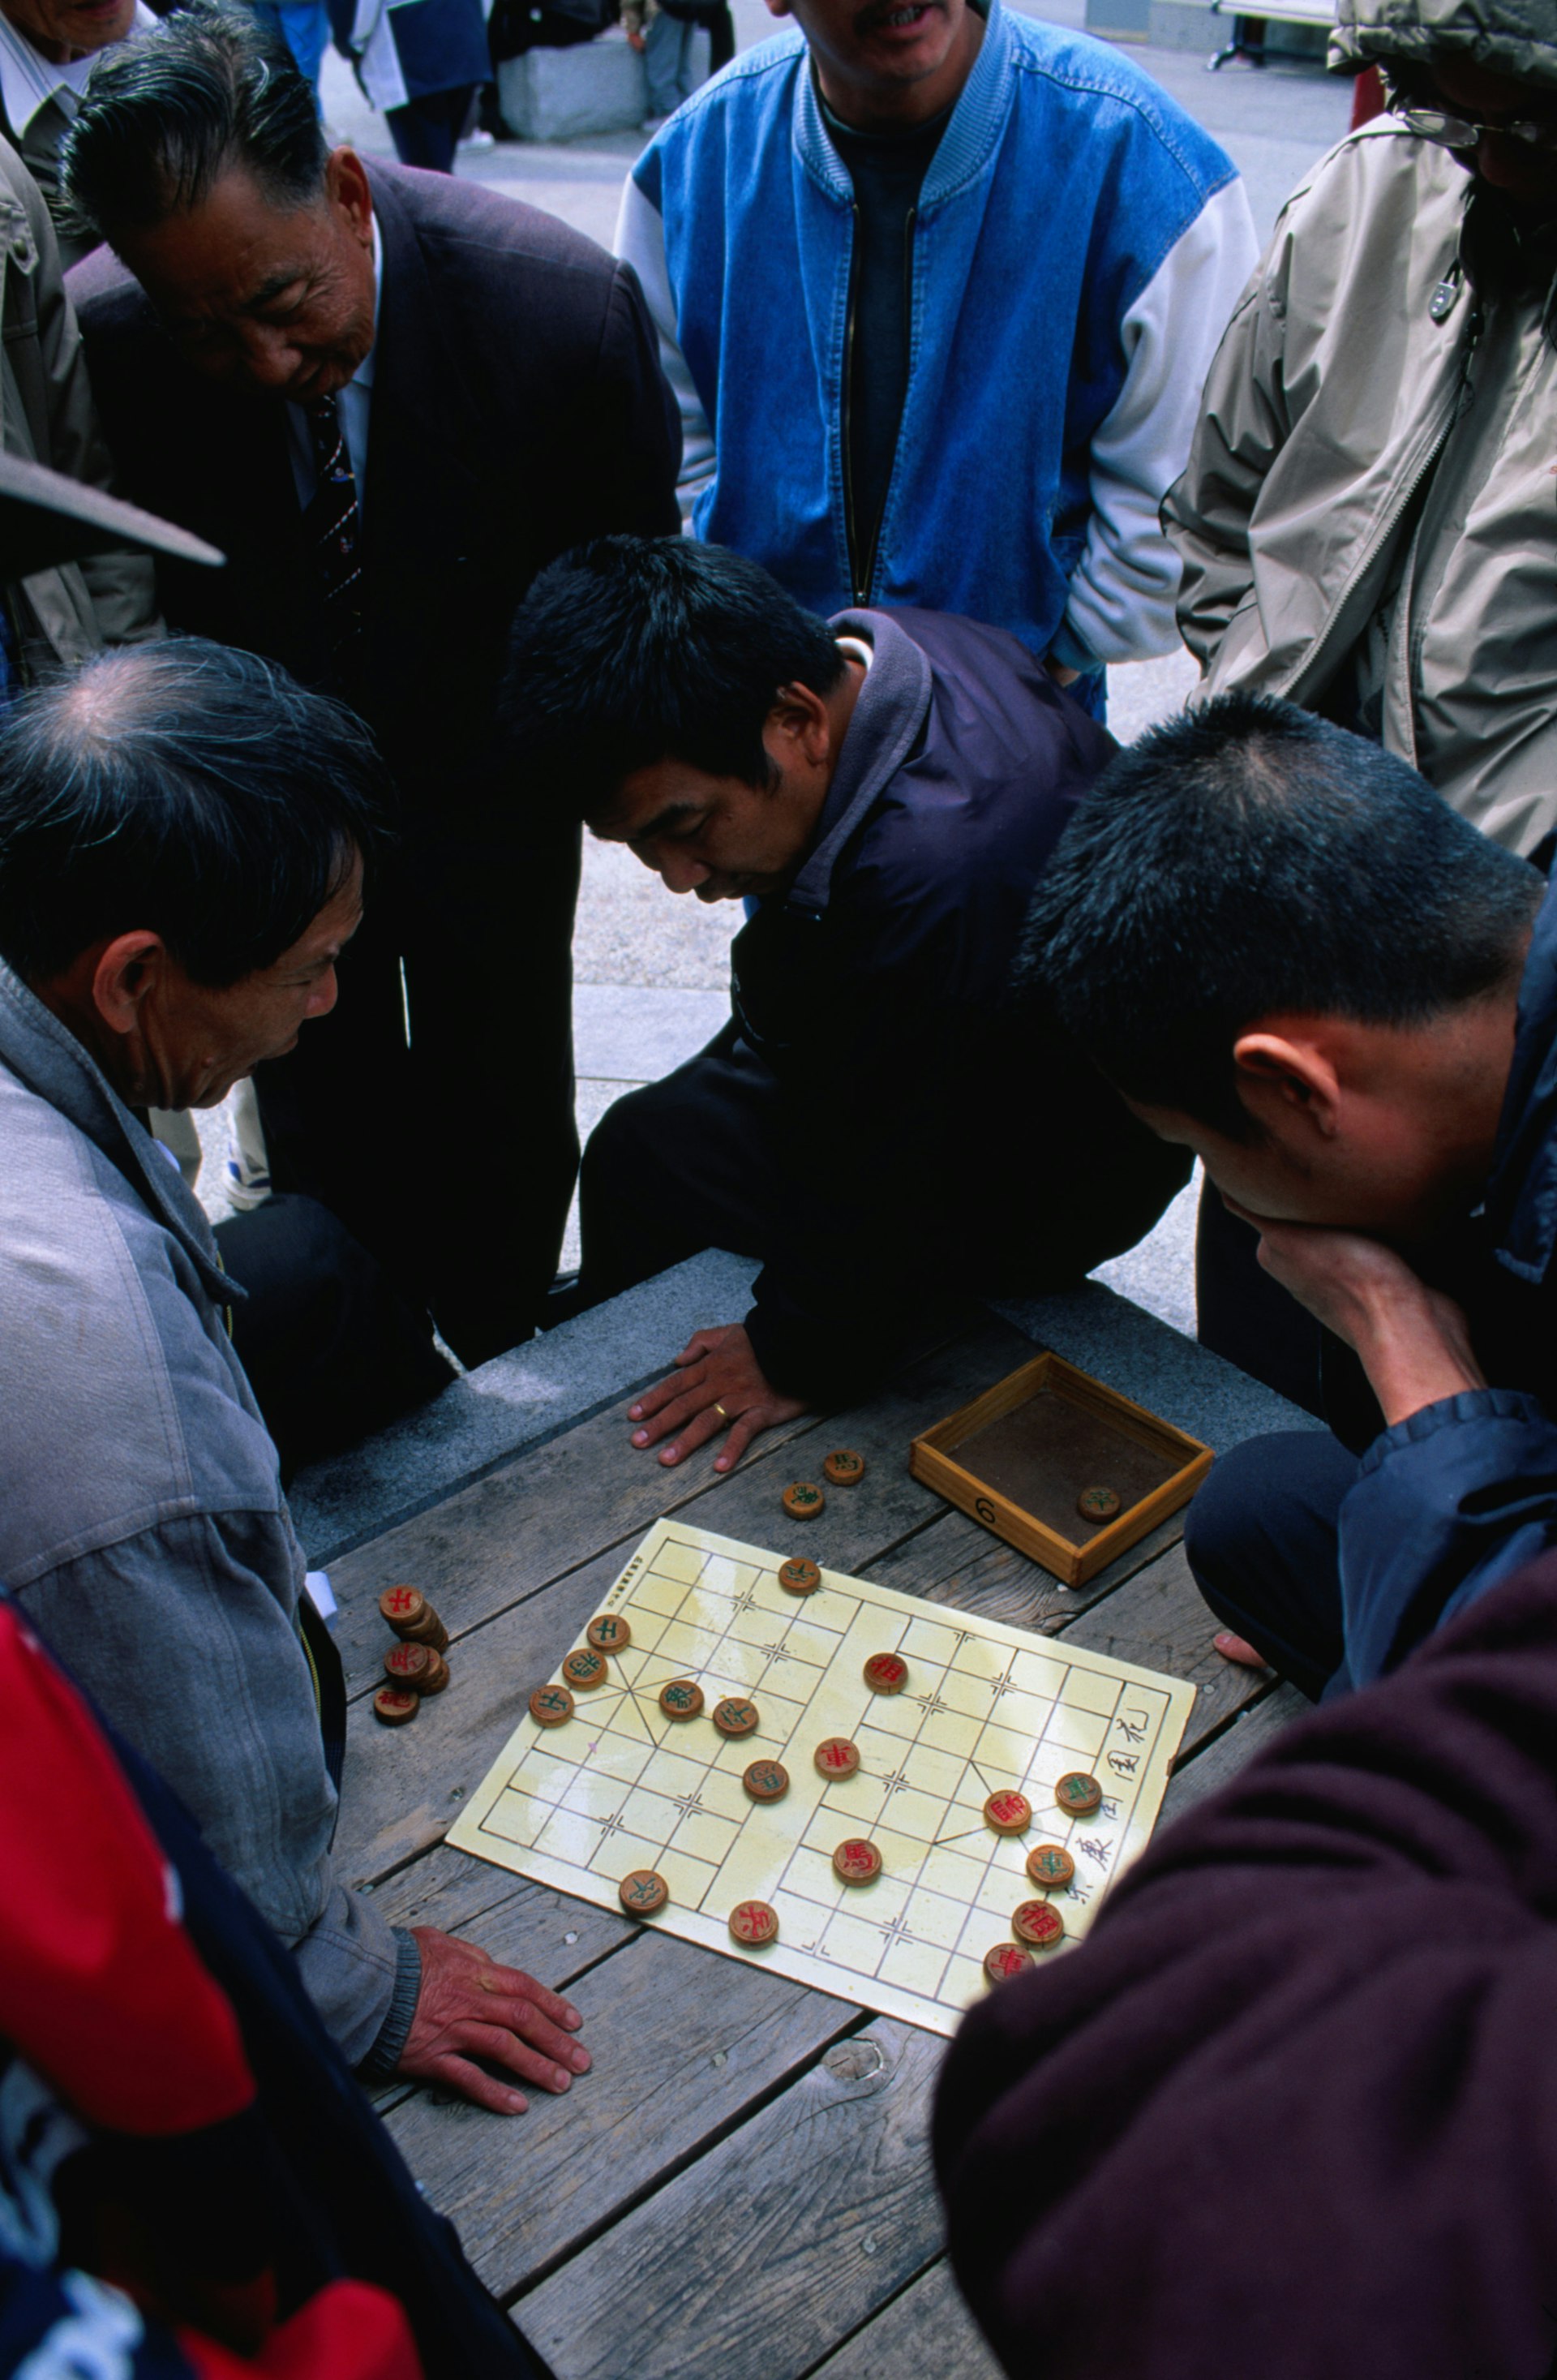 A group of men crowding around a game of Chinese chess at Portsmouth Square in Chinatown, San Francisco